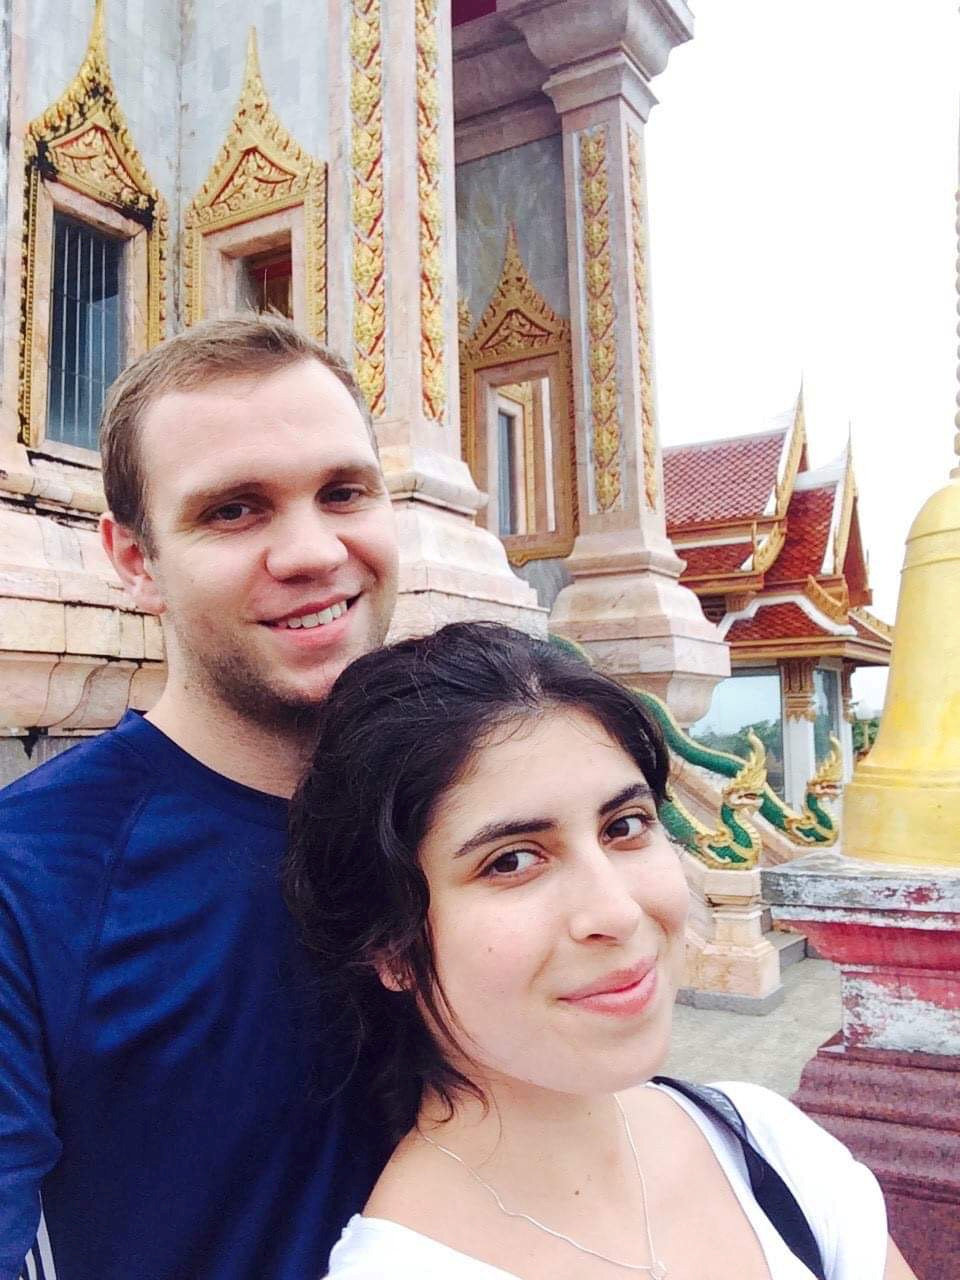 FILE PHOTO: British academic Matthew Hedges, who has been jailed for spying in the UAE, is seen in this undated selfie photo with his wife Daniela Tejada whilst on holiday in Thailand, supplied by his wife Daniela Tejada